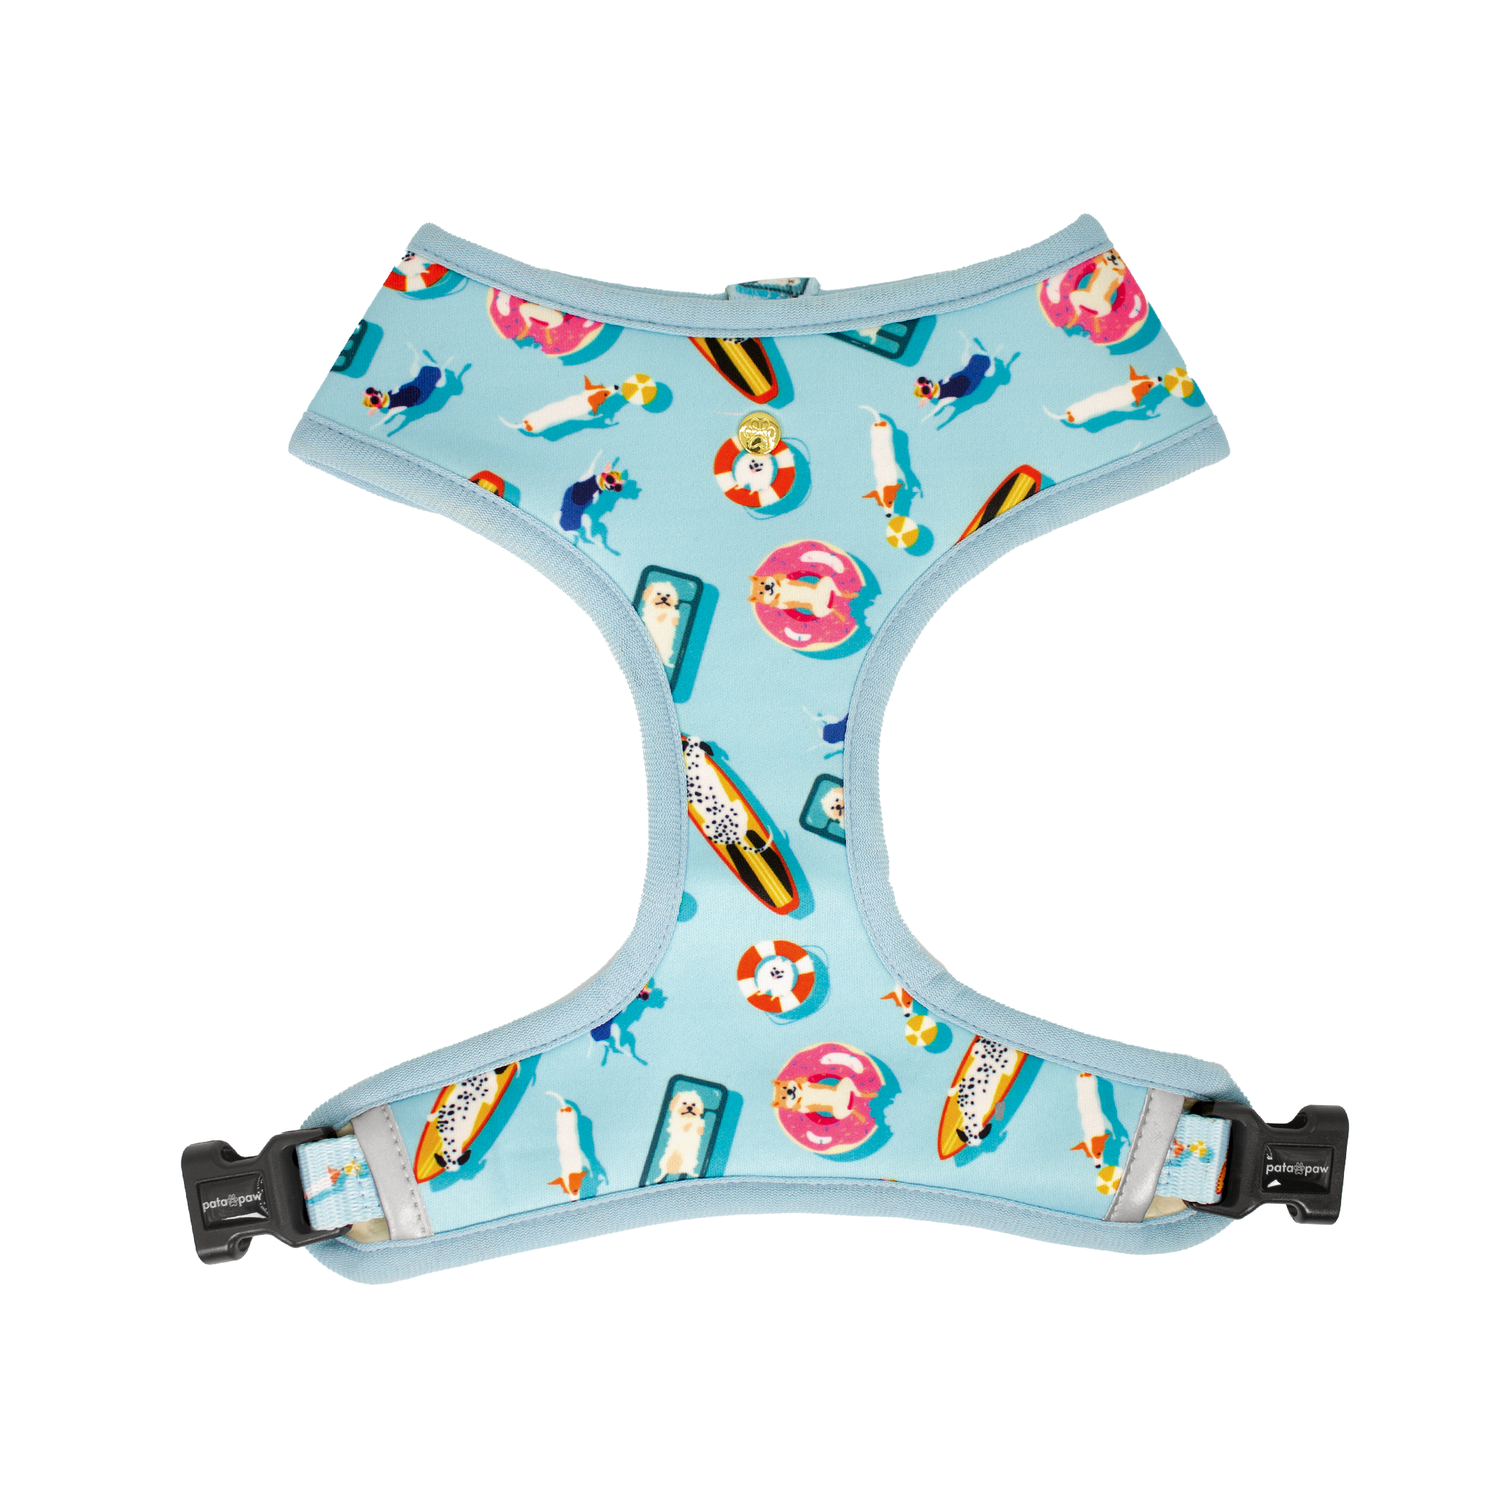 Pata Paw pool pups reversible harness showing its pattern.